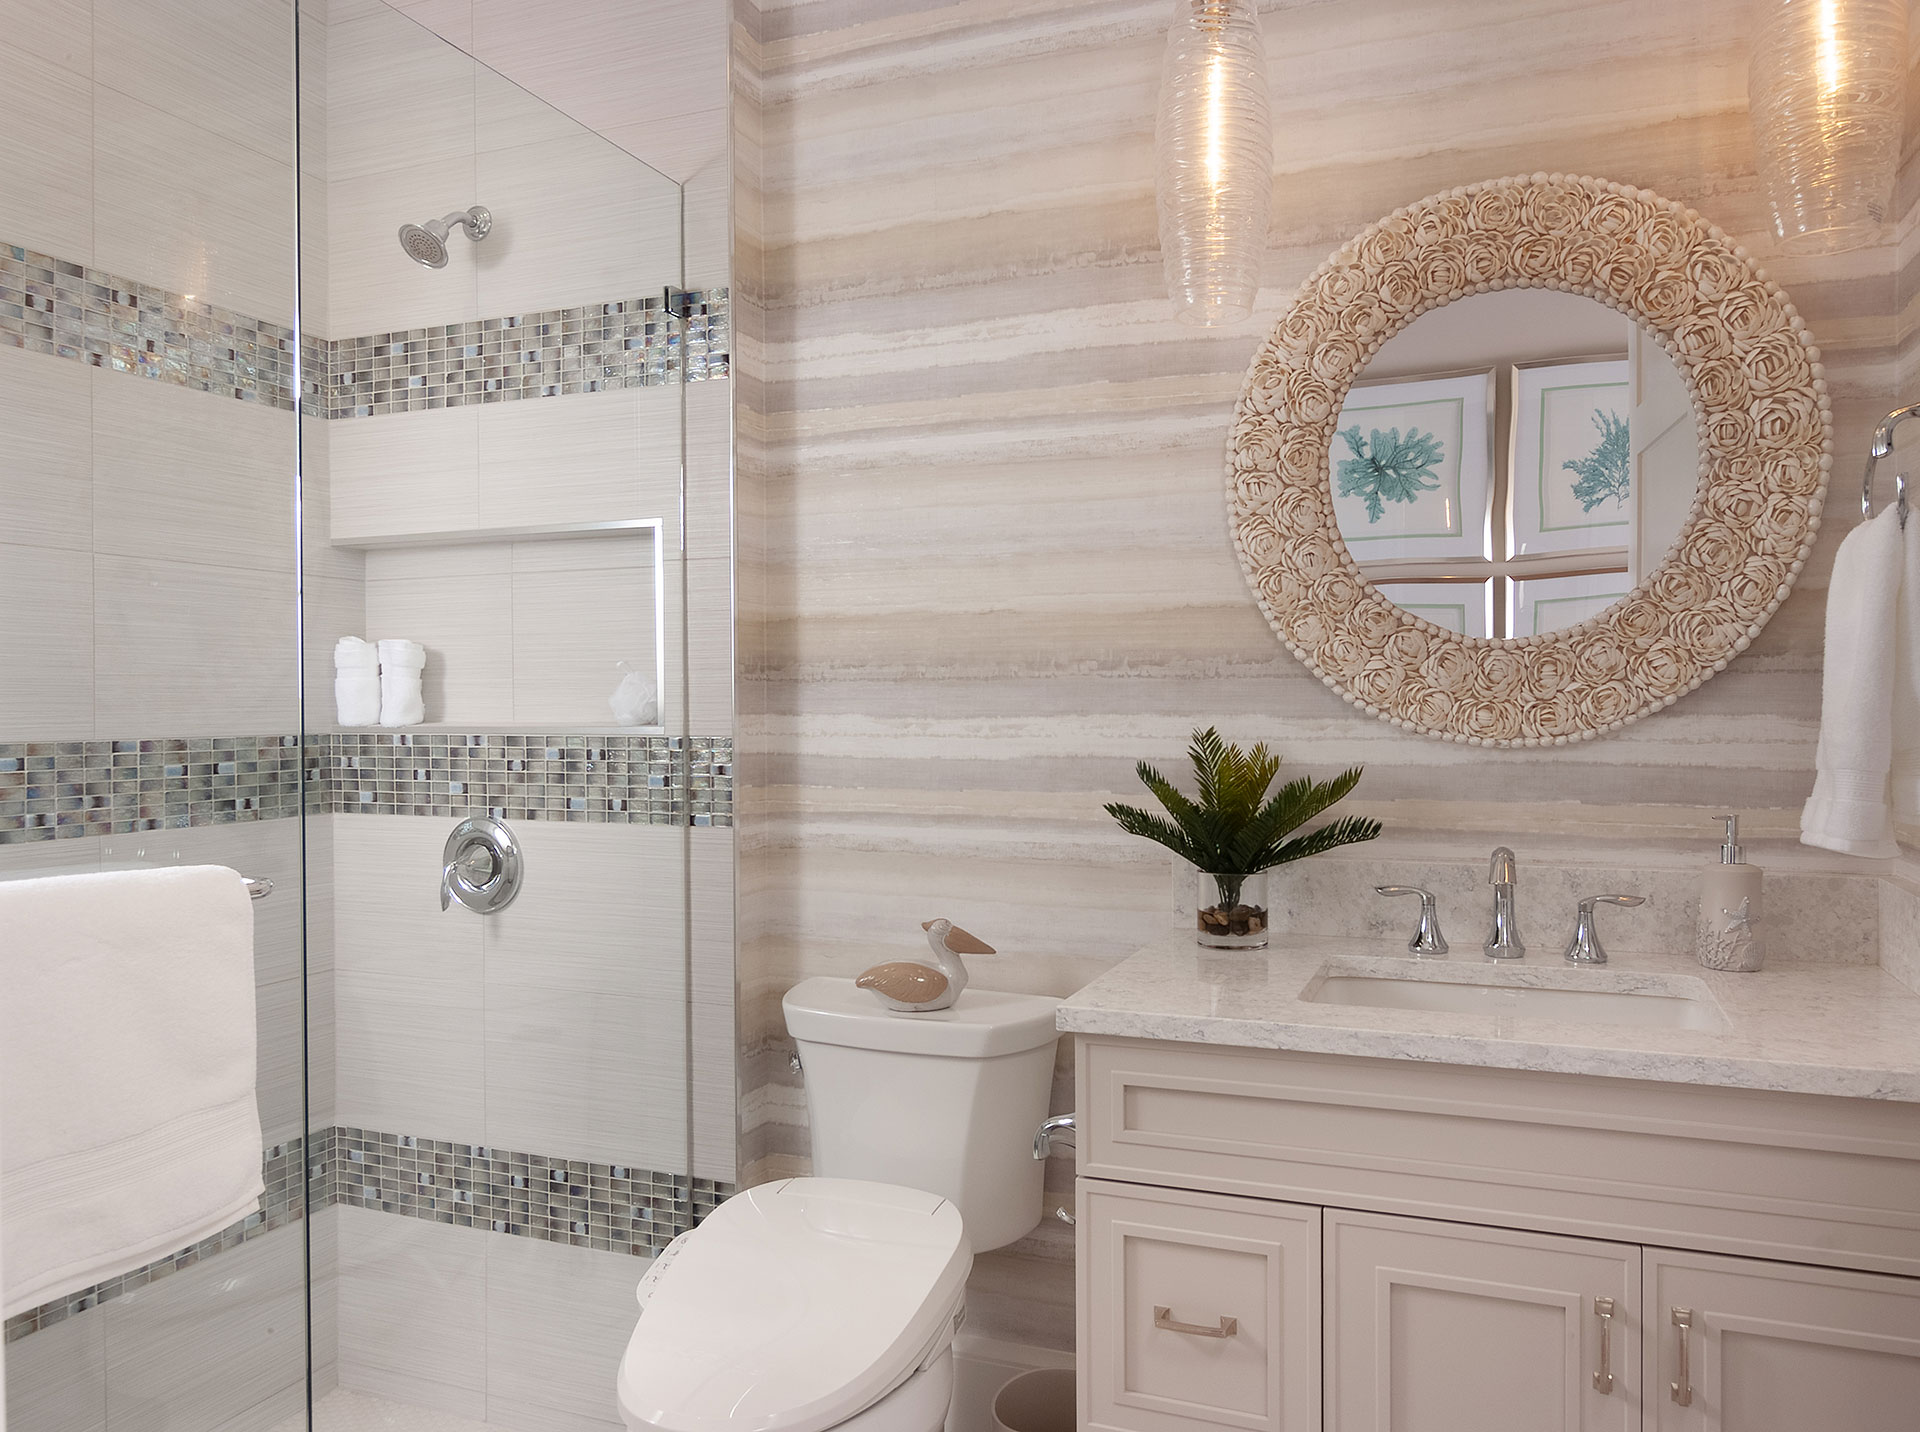 Tips for keeping a small bathroom organized